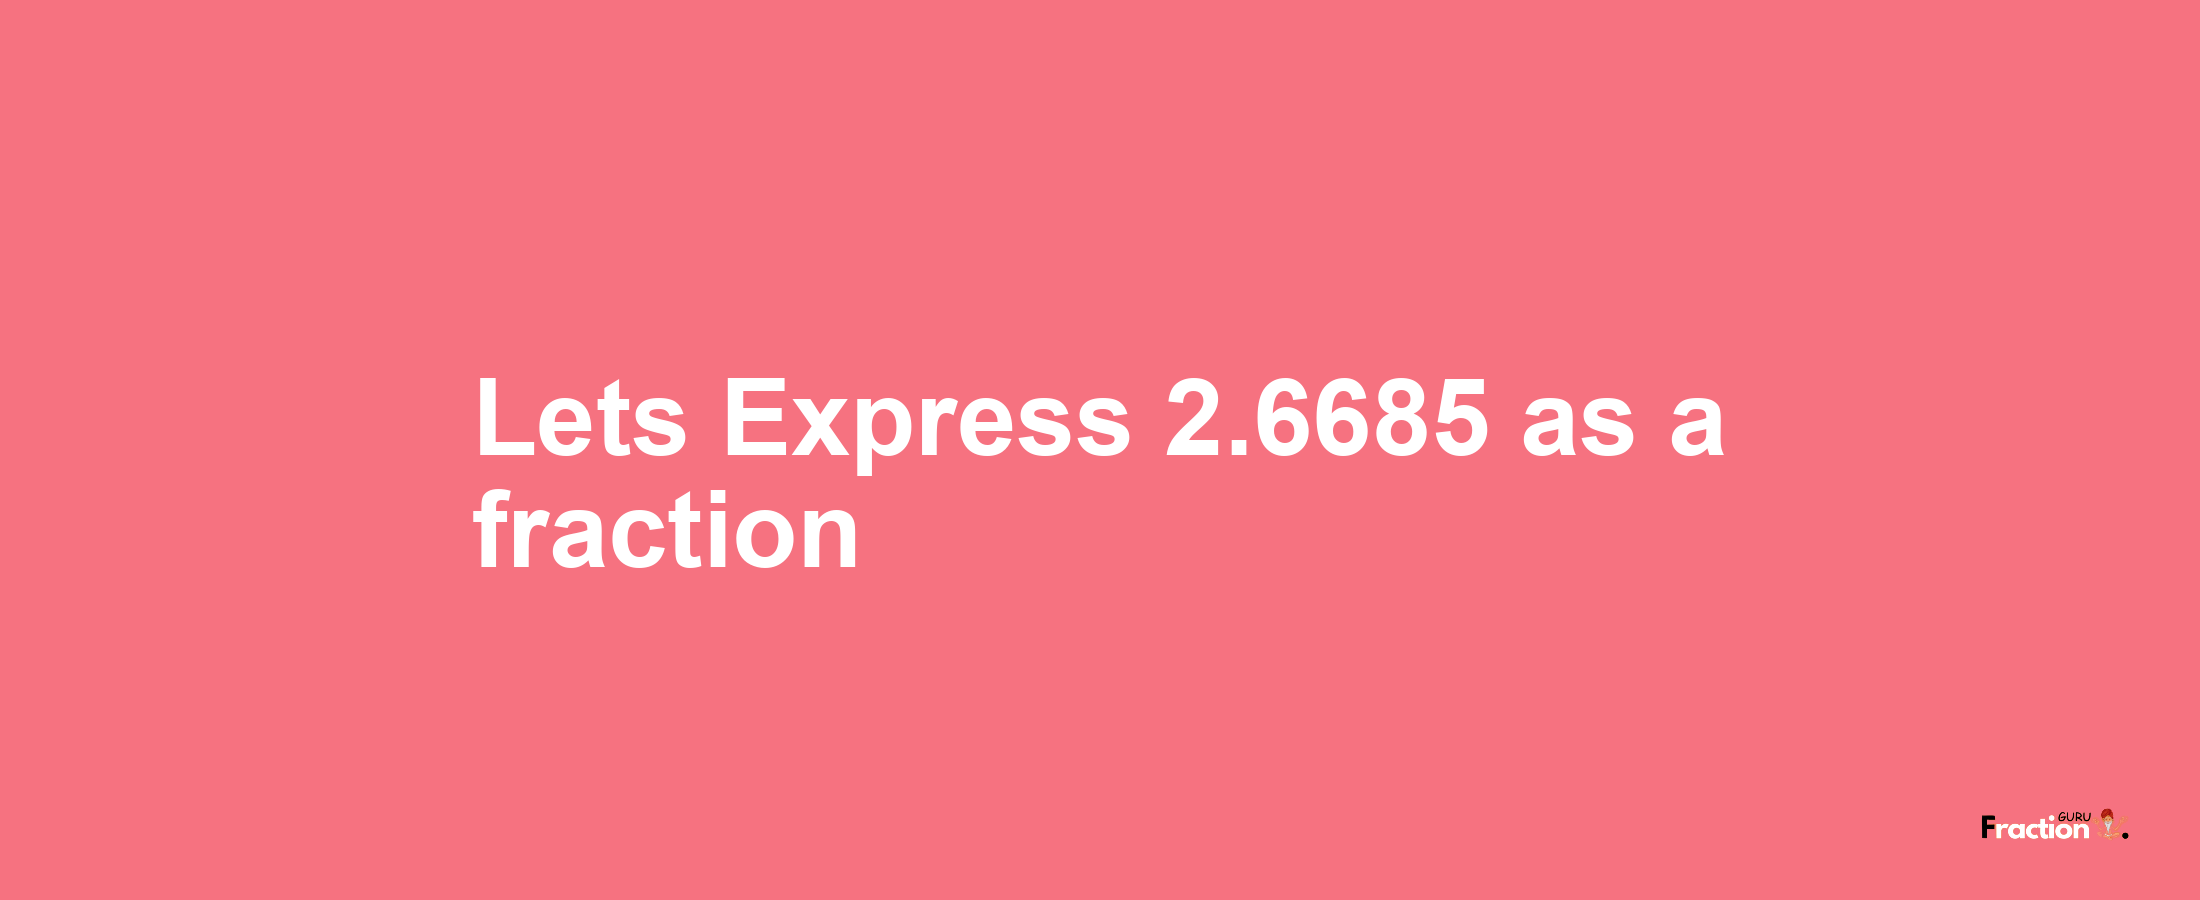 Lets Express 2.6685 as afraction